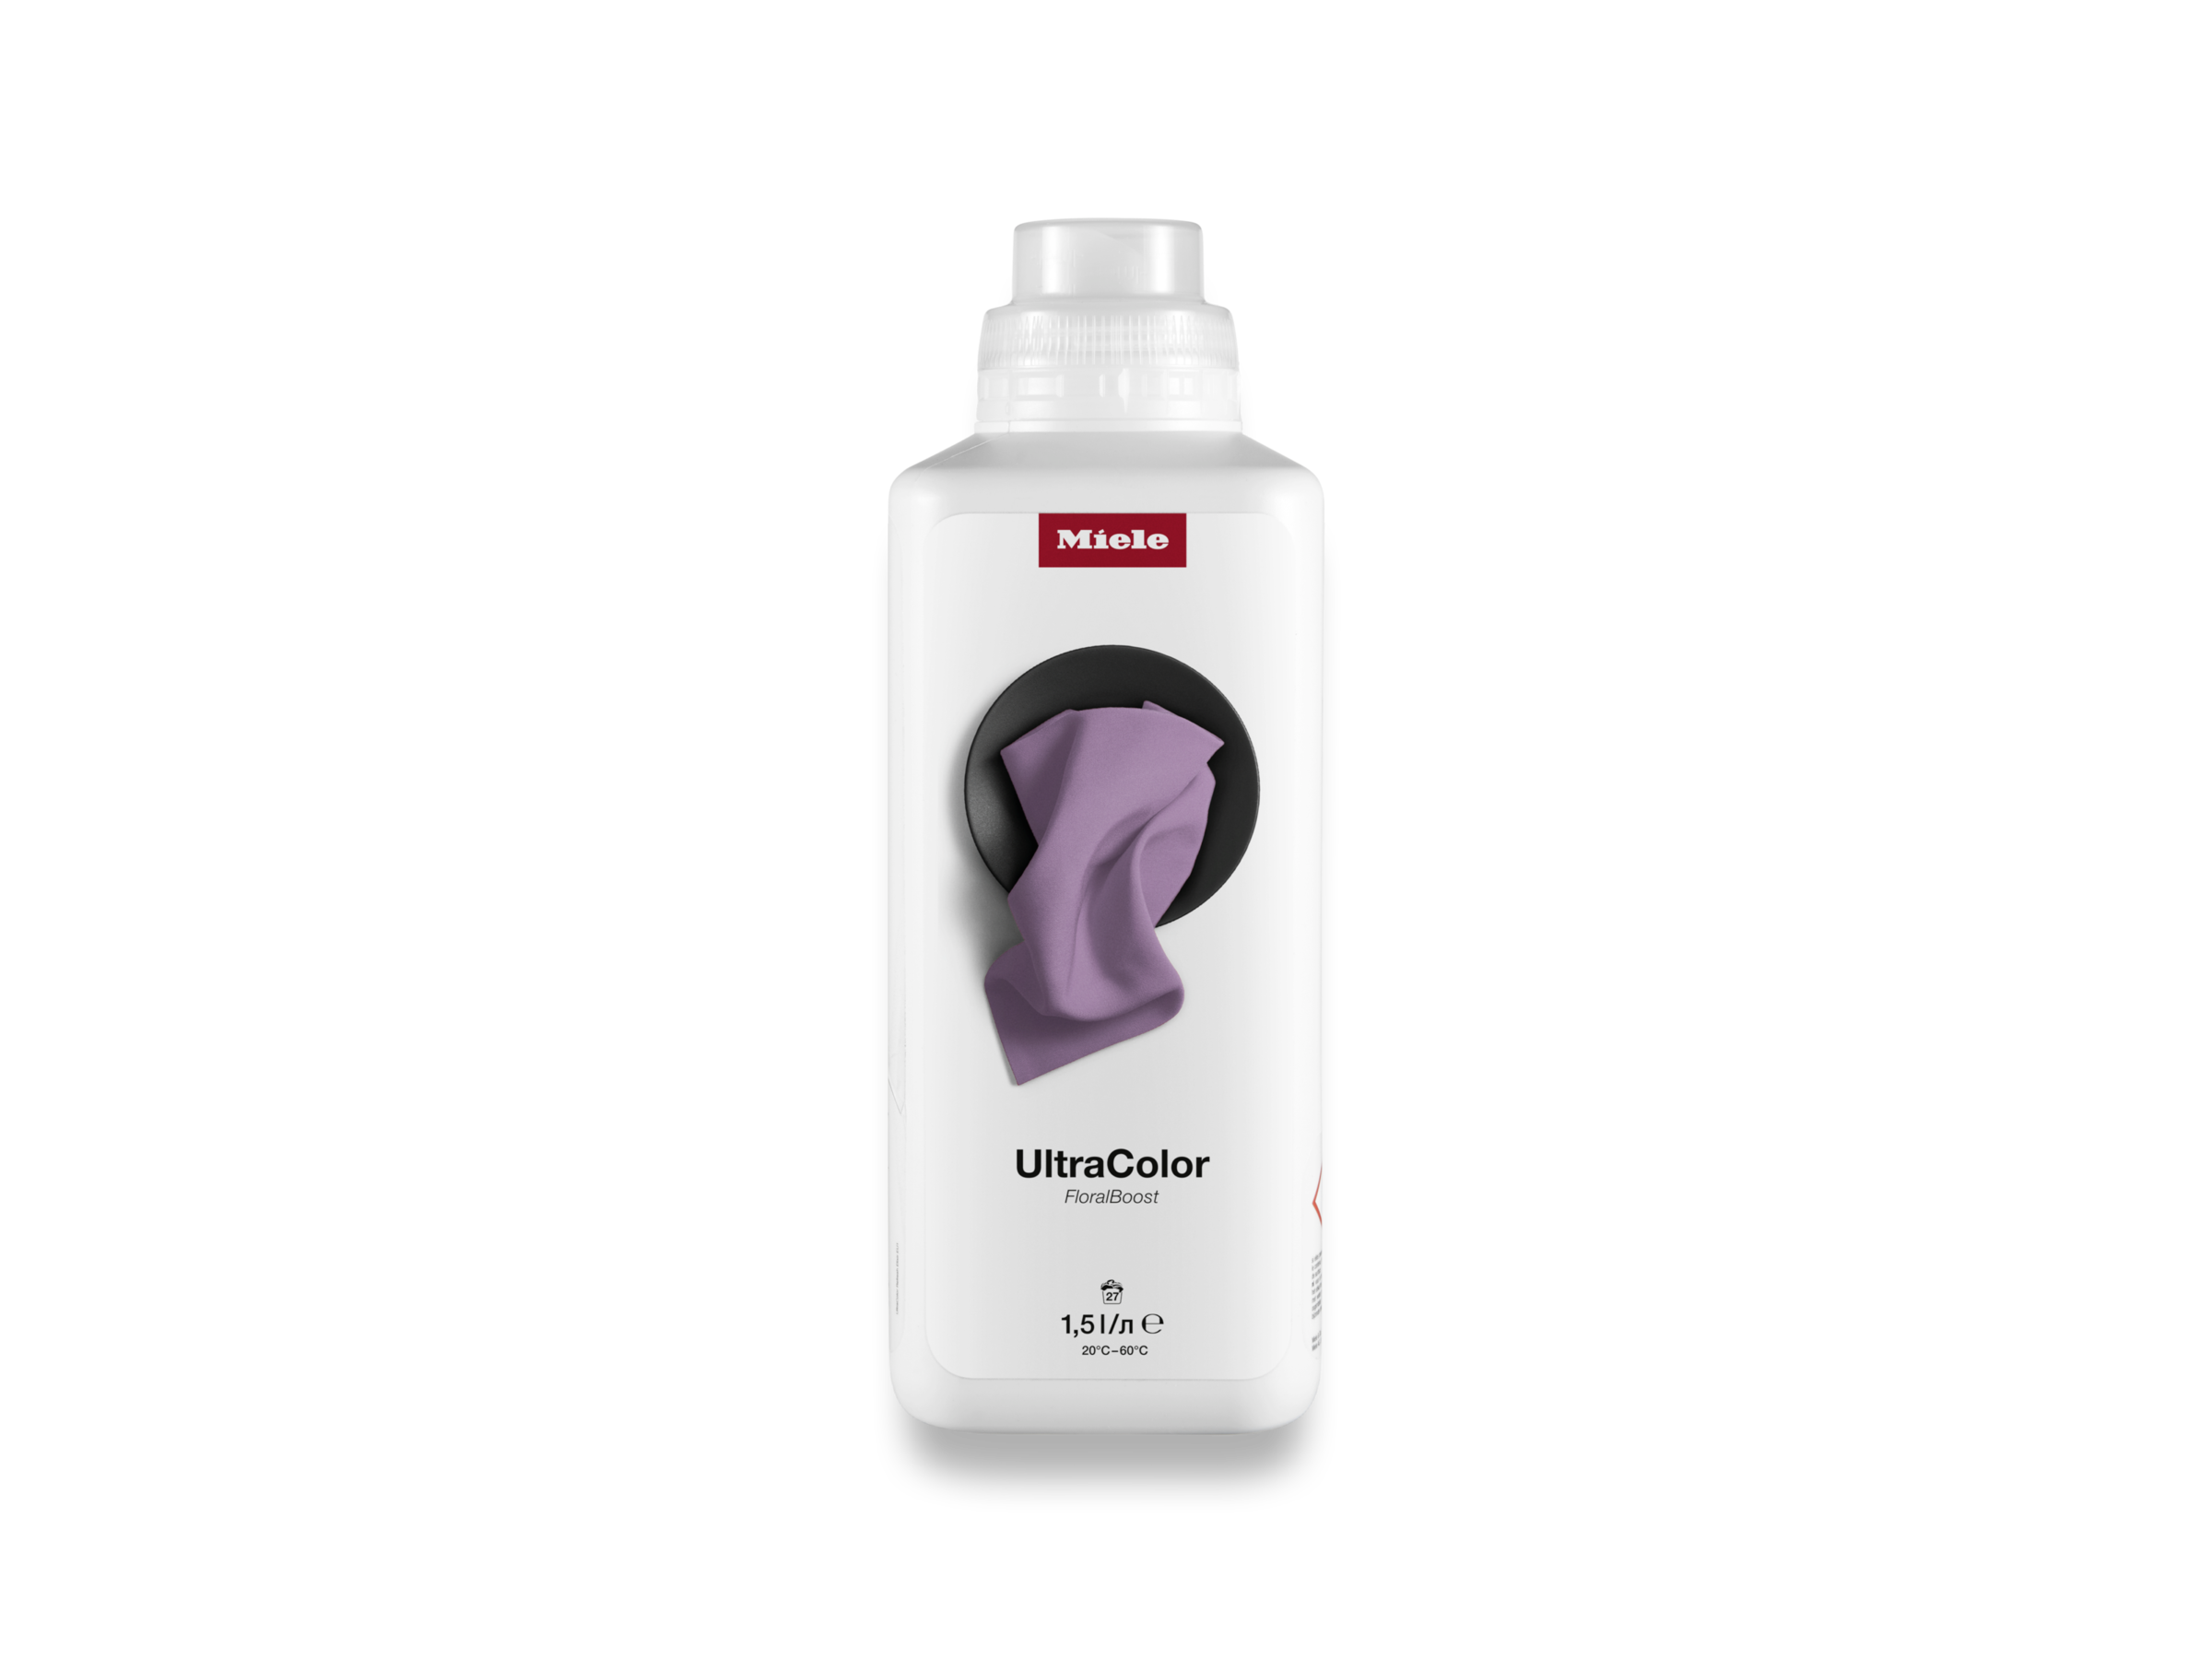 Miele Colorwaschmittel »UltraColor FloralBoost 1,5 l Limited Edition«